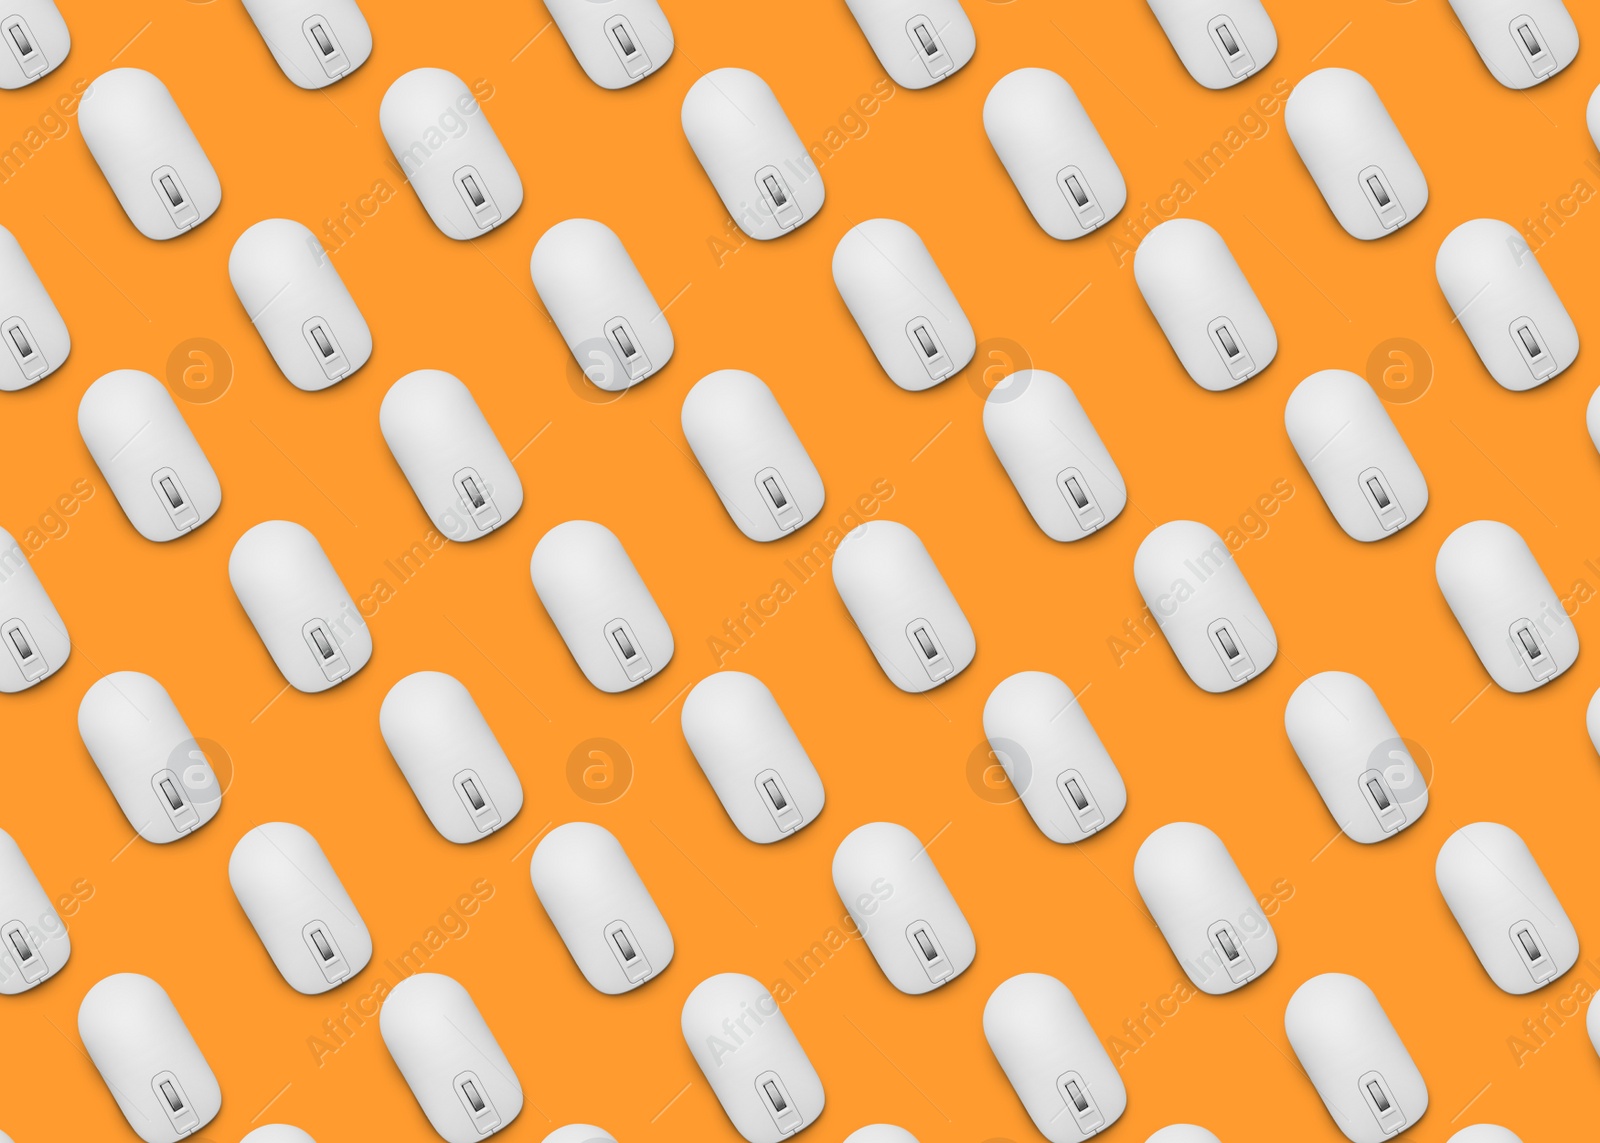 Image of Many white computer mouses on orange background, flat lay. Seamless pattern design